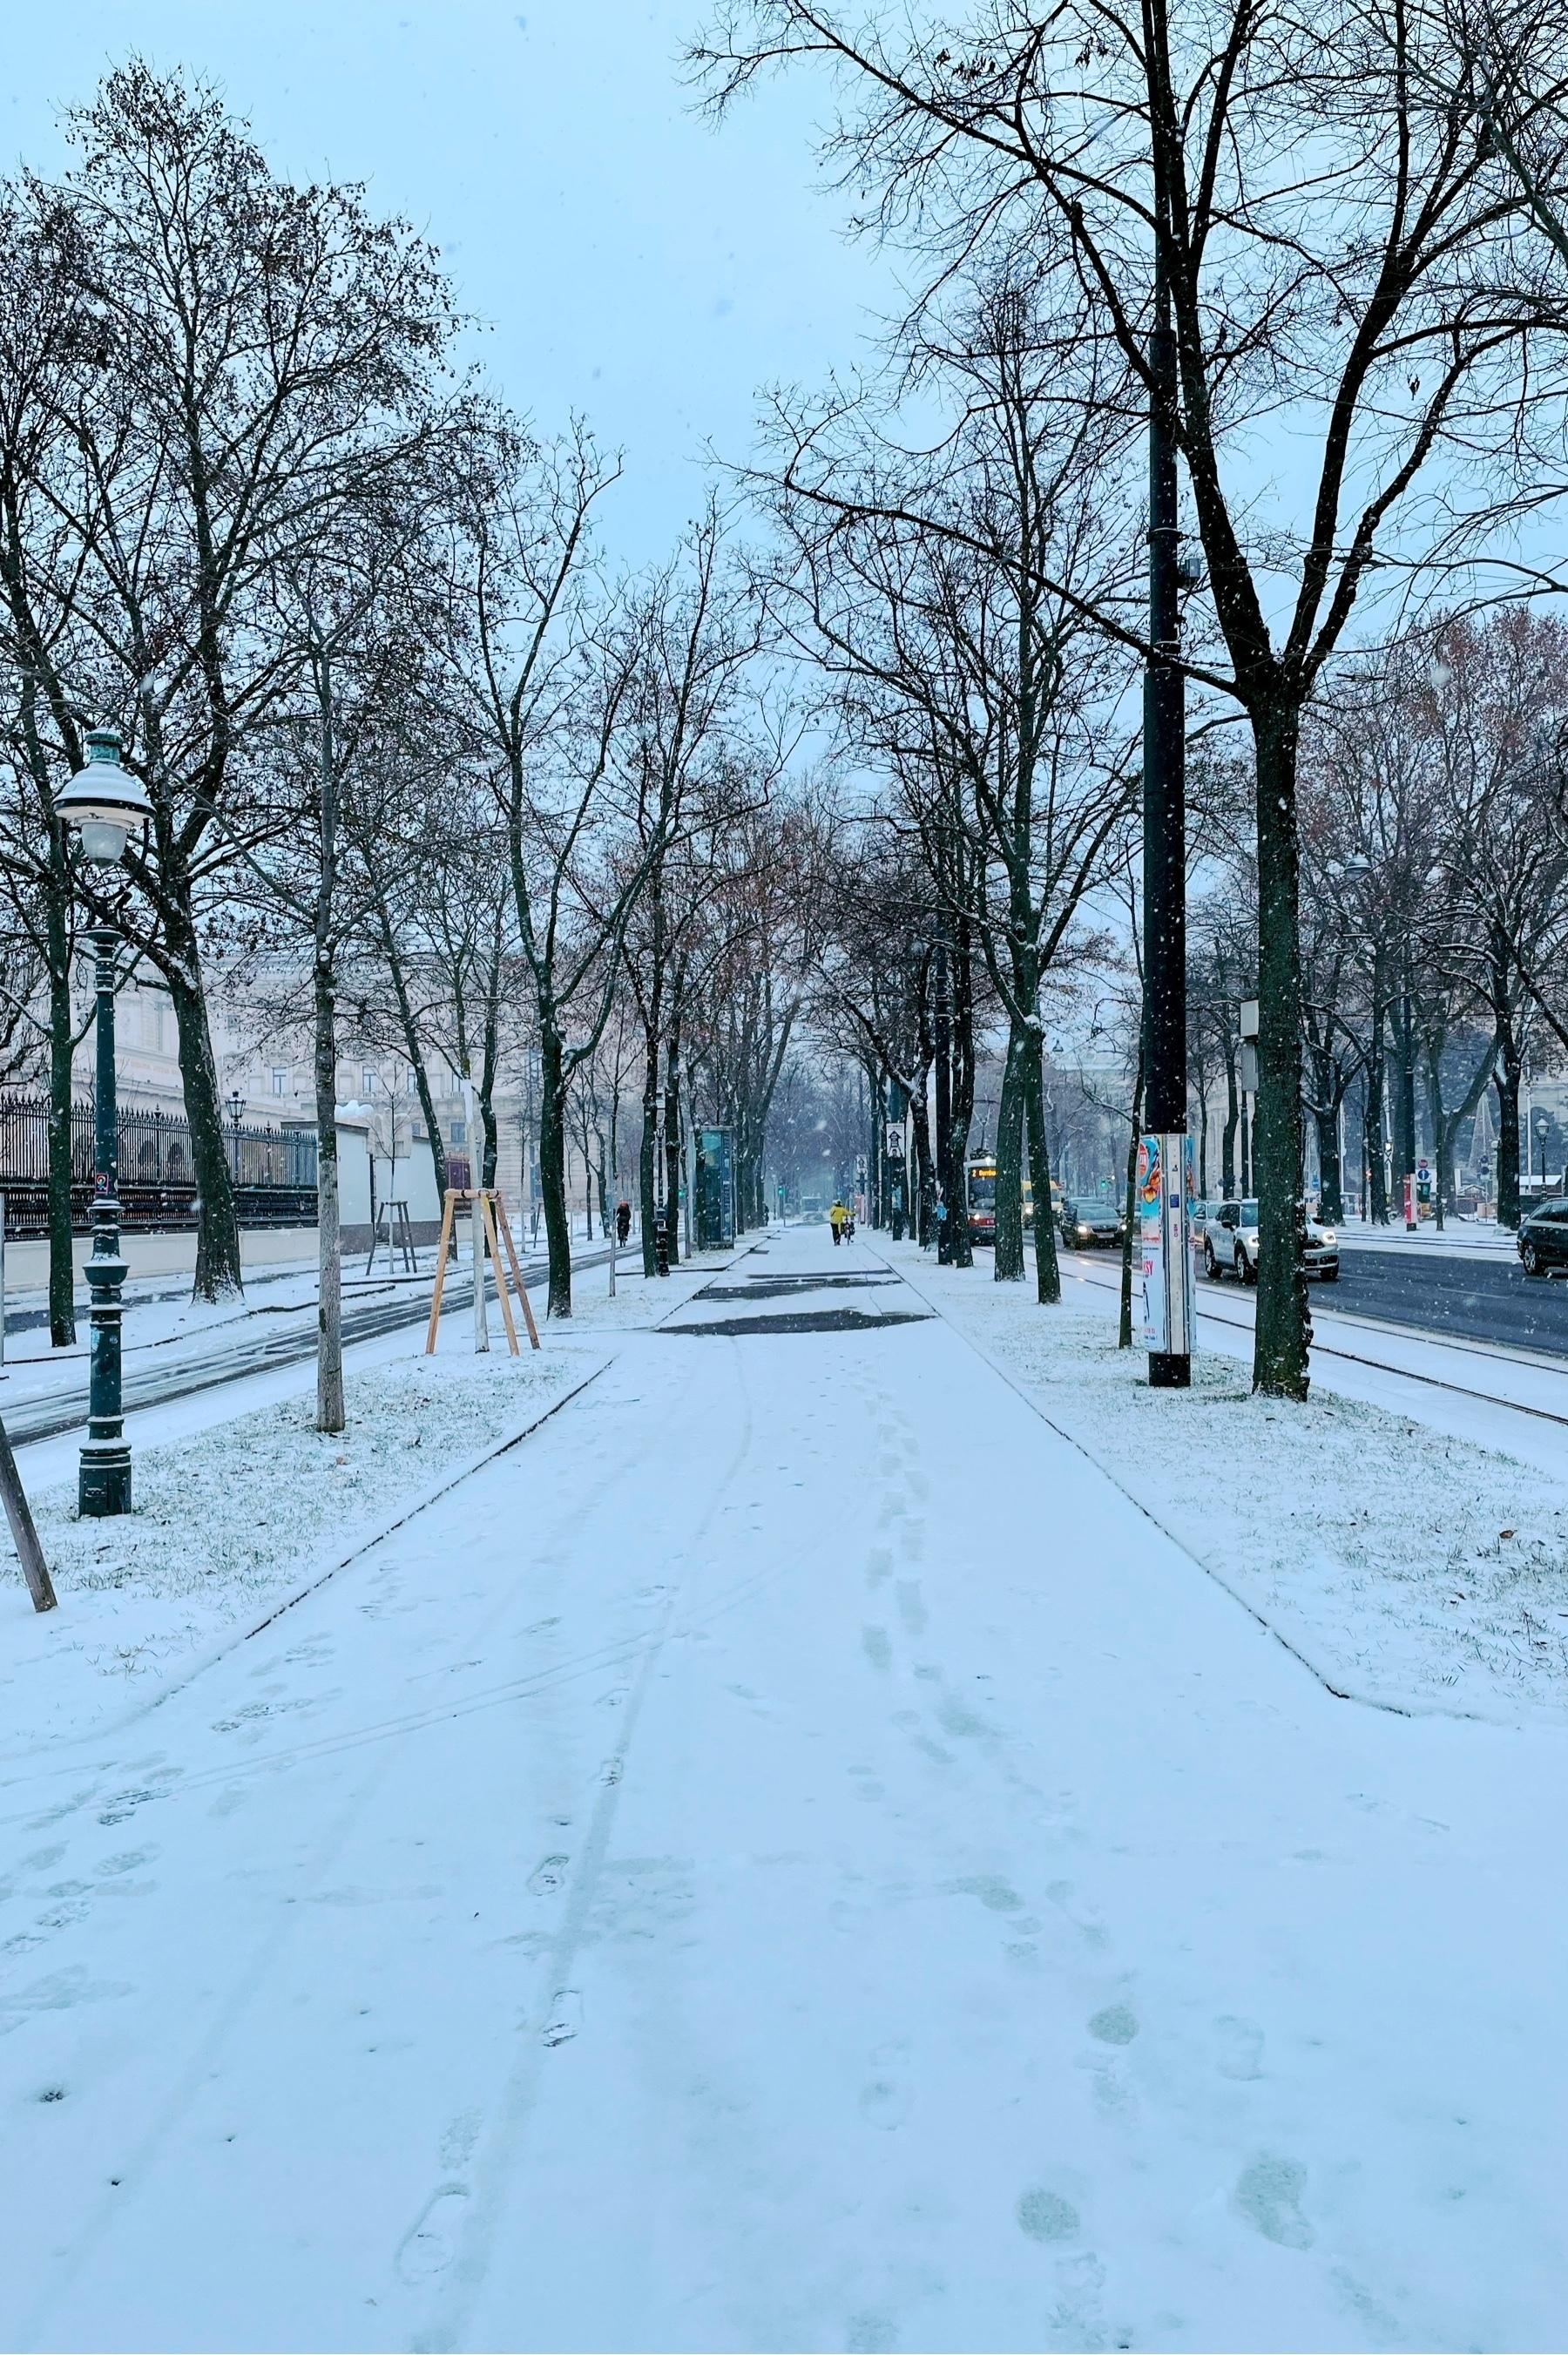 Pedestrian walk way, trees on each side, on the right is a street with cars and a tram, on the left some imperial Habsburg buildings. It is snowing and there is roughly 2 cm of snow on the ground